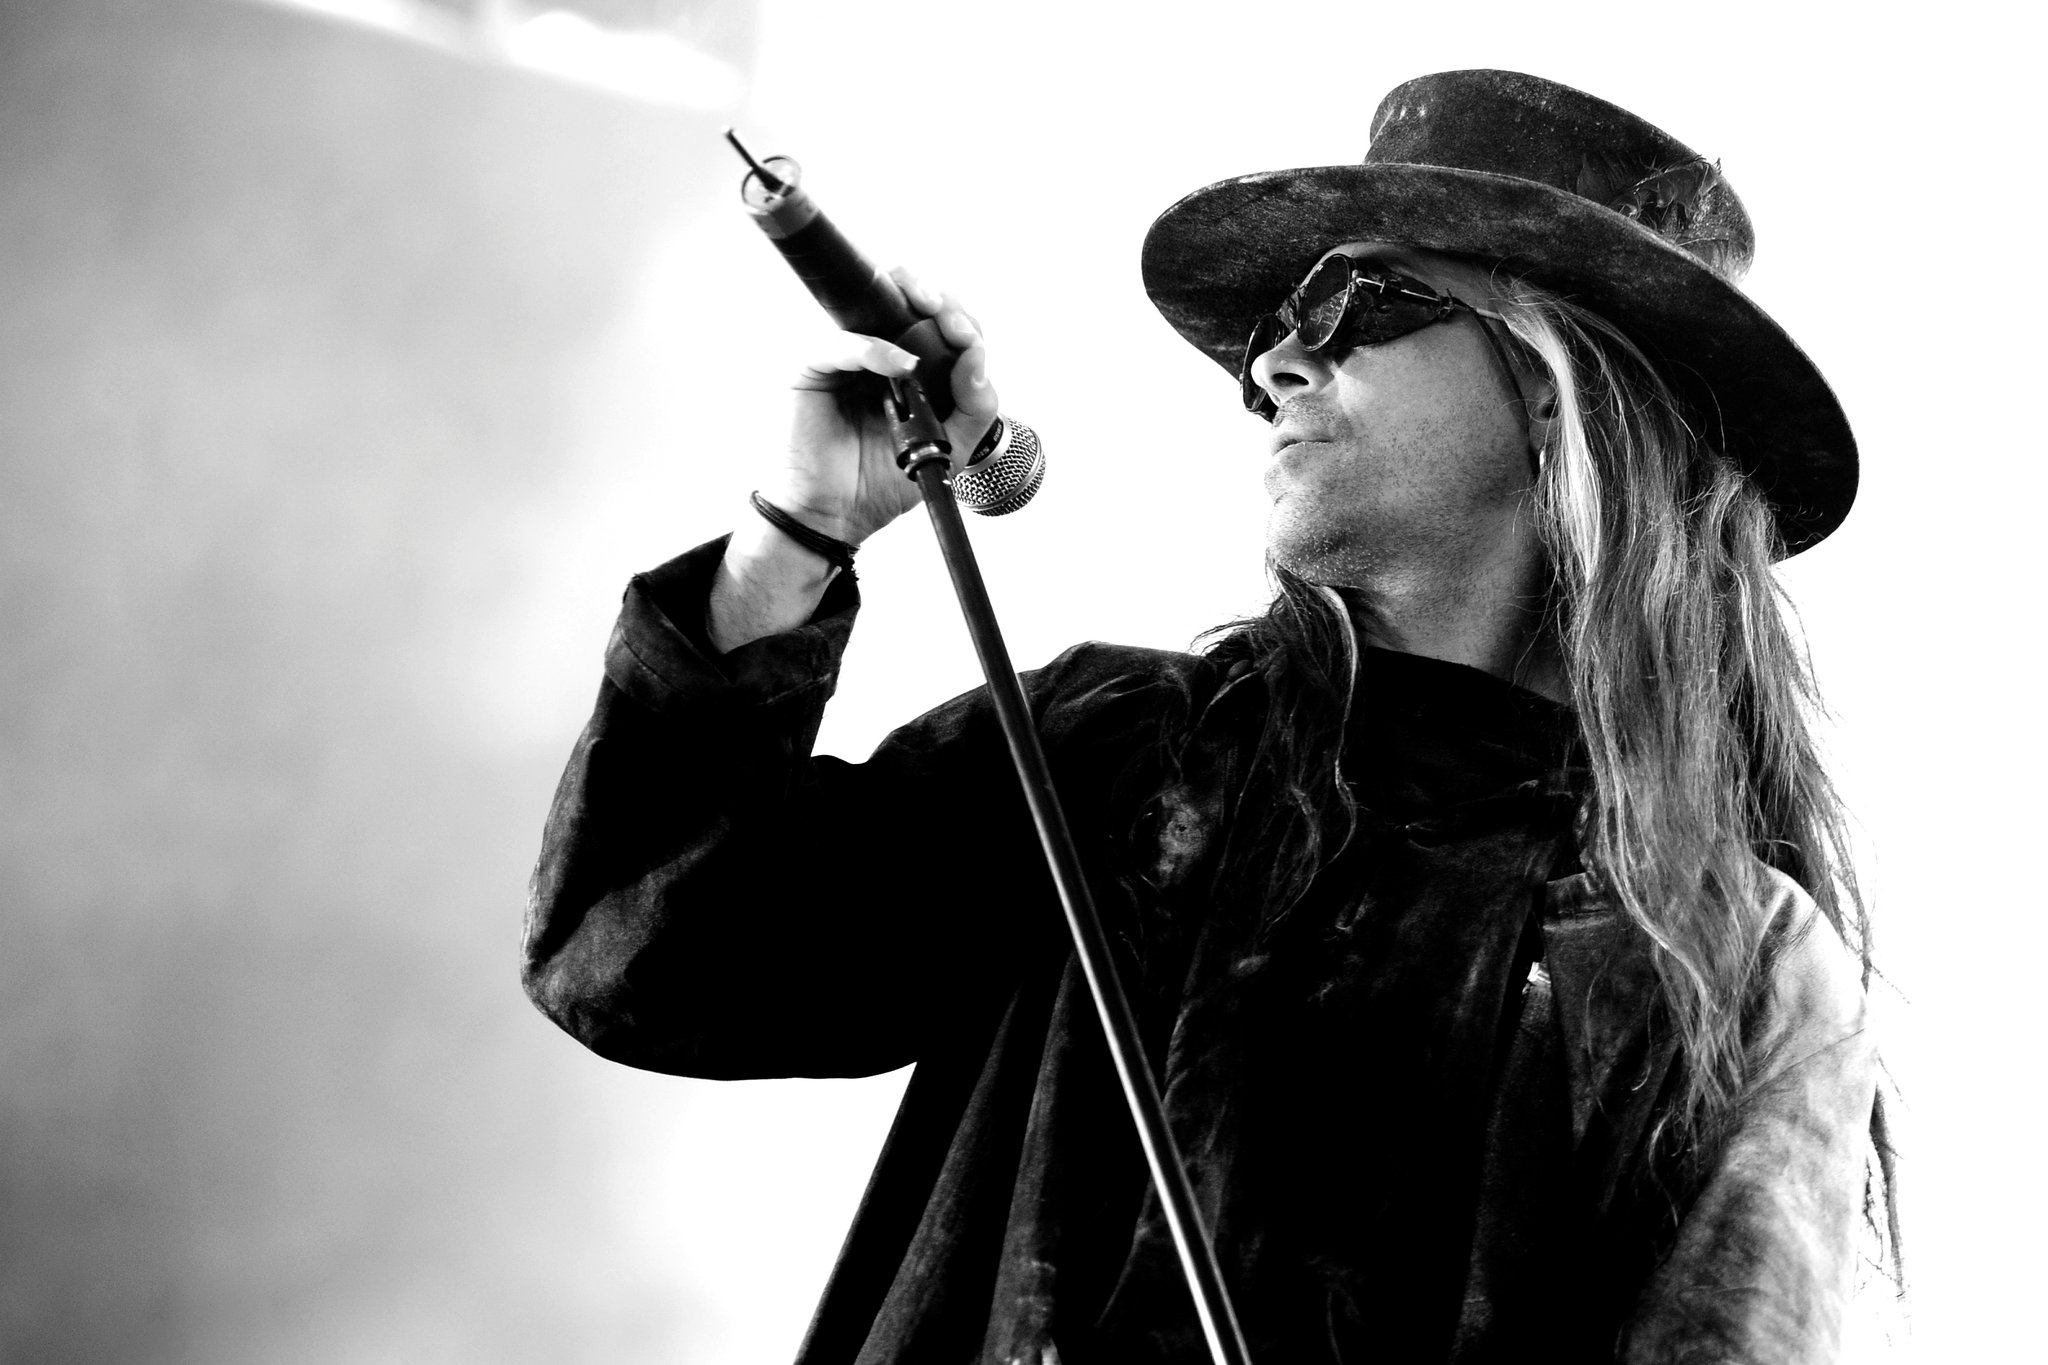 Fields of the Nephilim document 2008 London concerts with ‘Ceremonies’ CD/DVD package